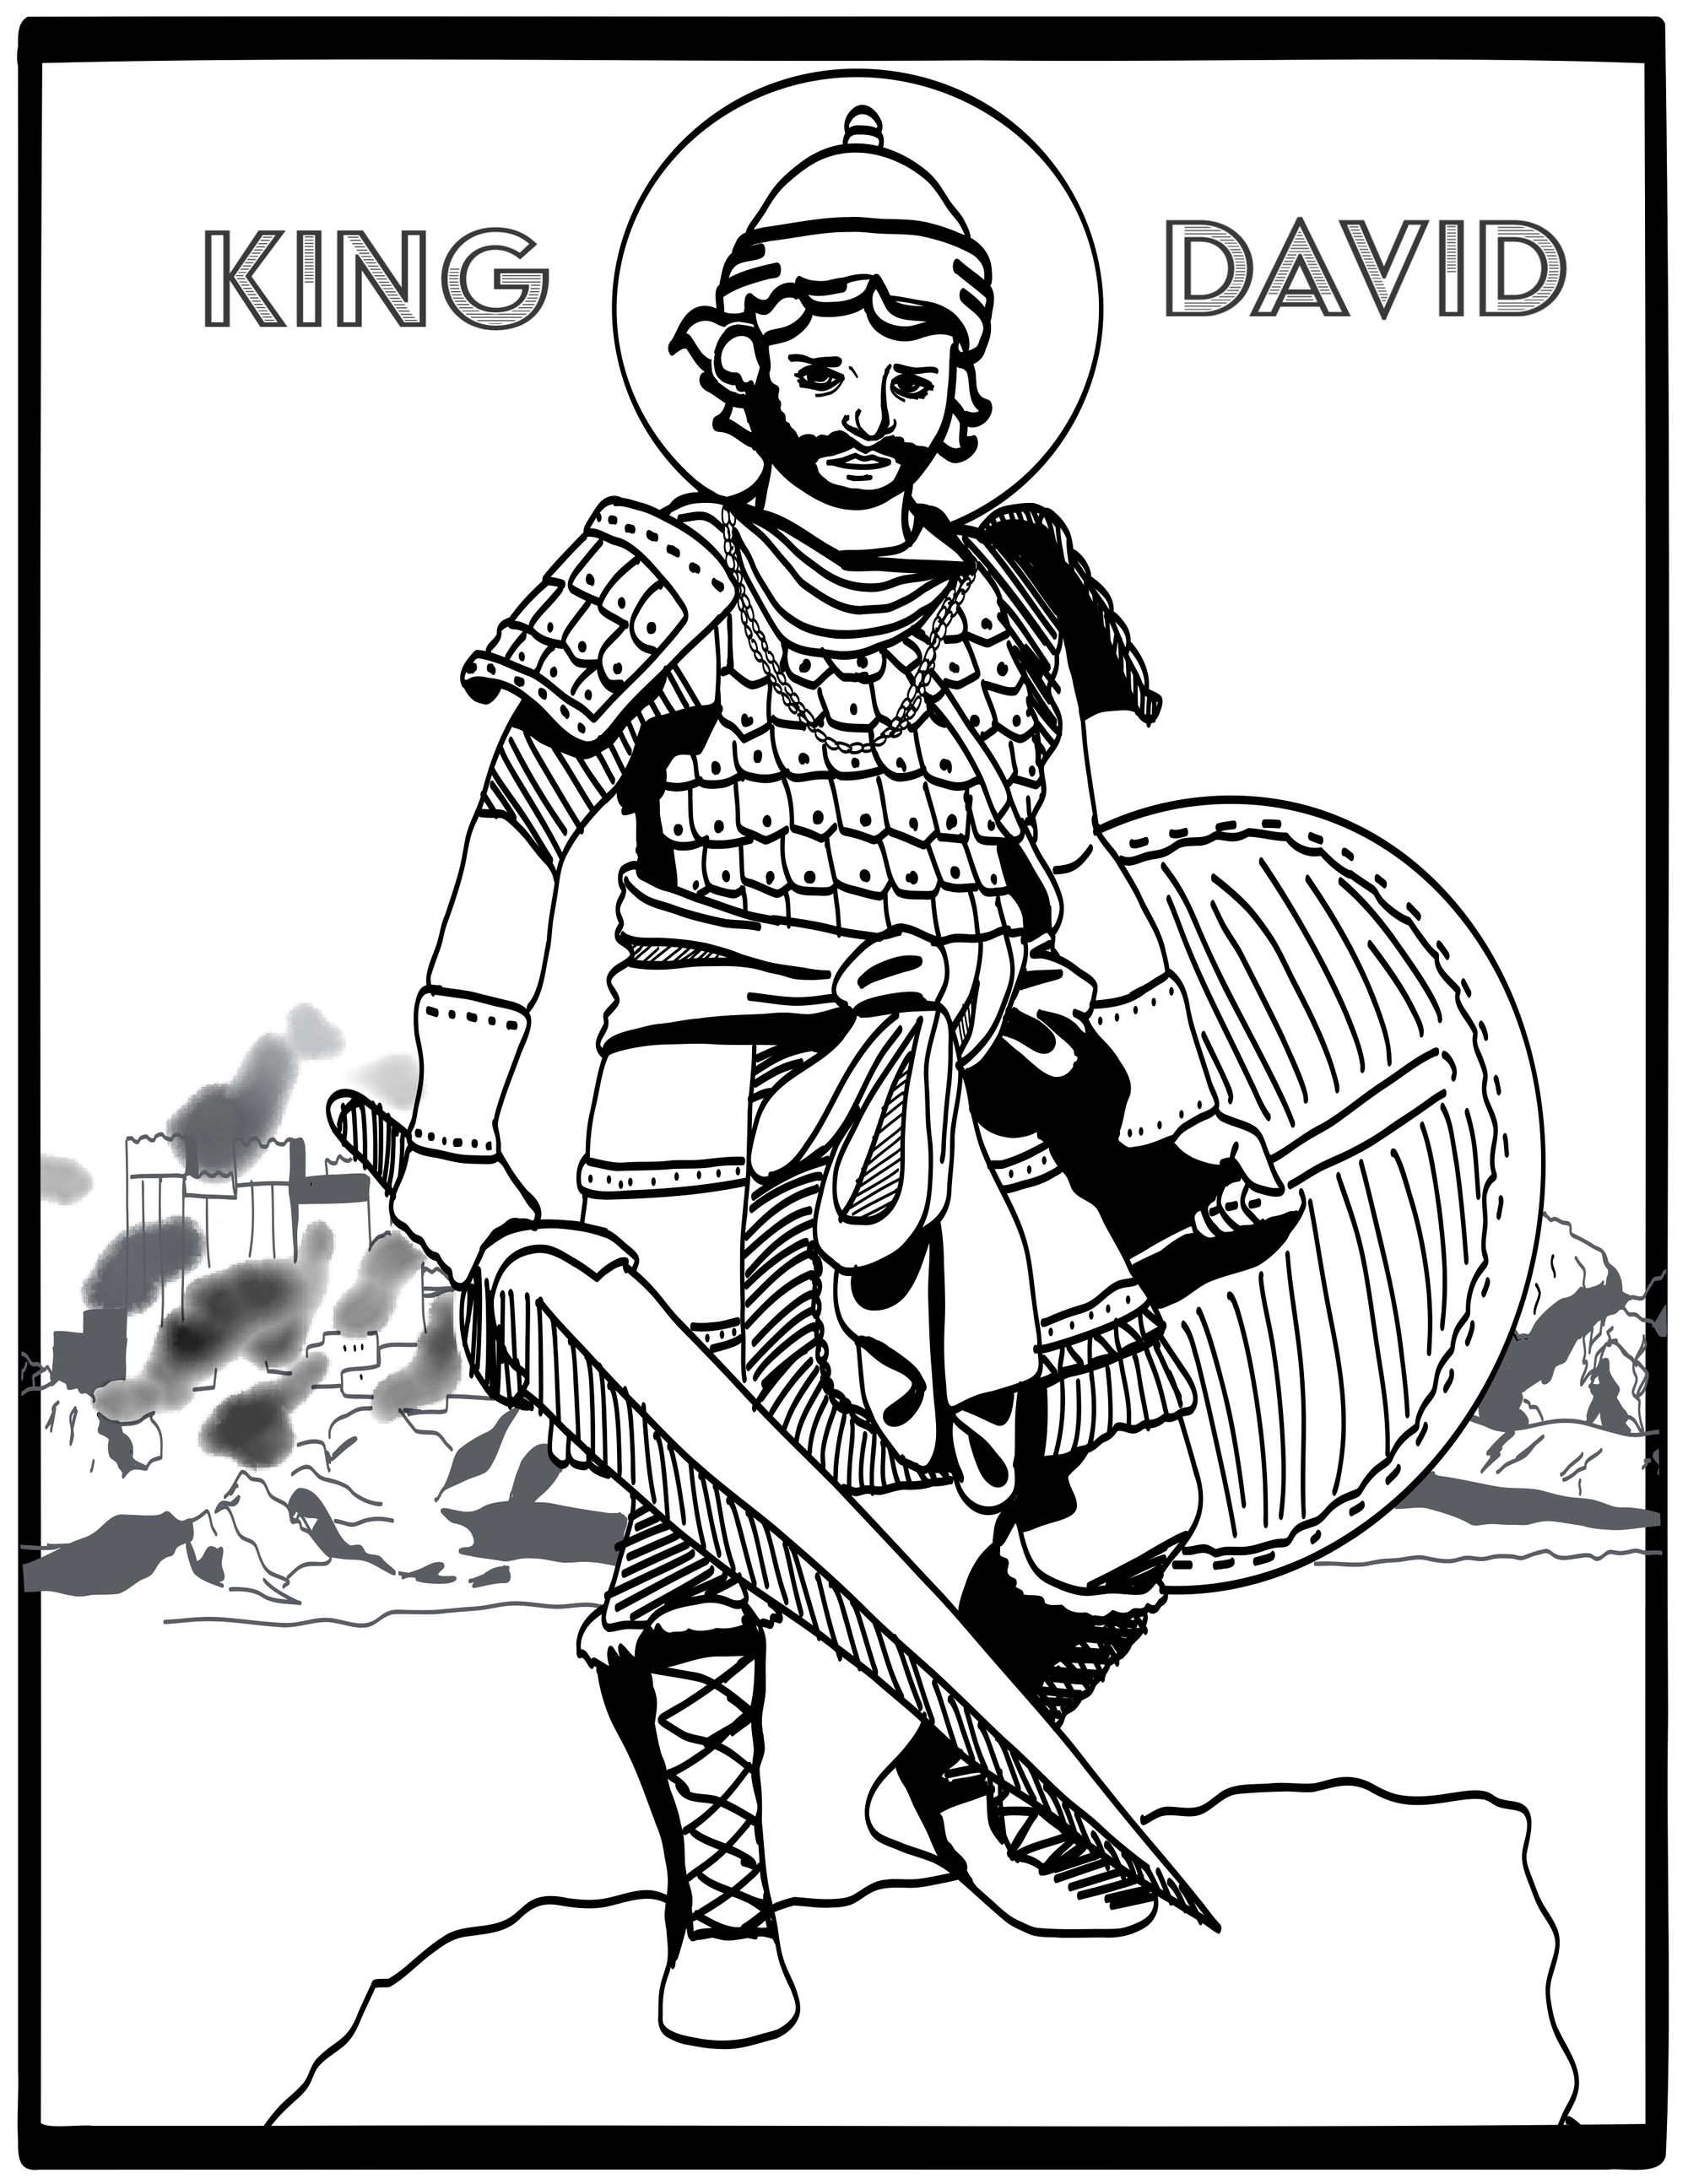 david and saul bible coloring pages